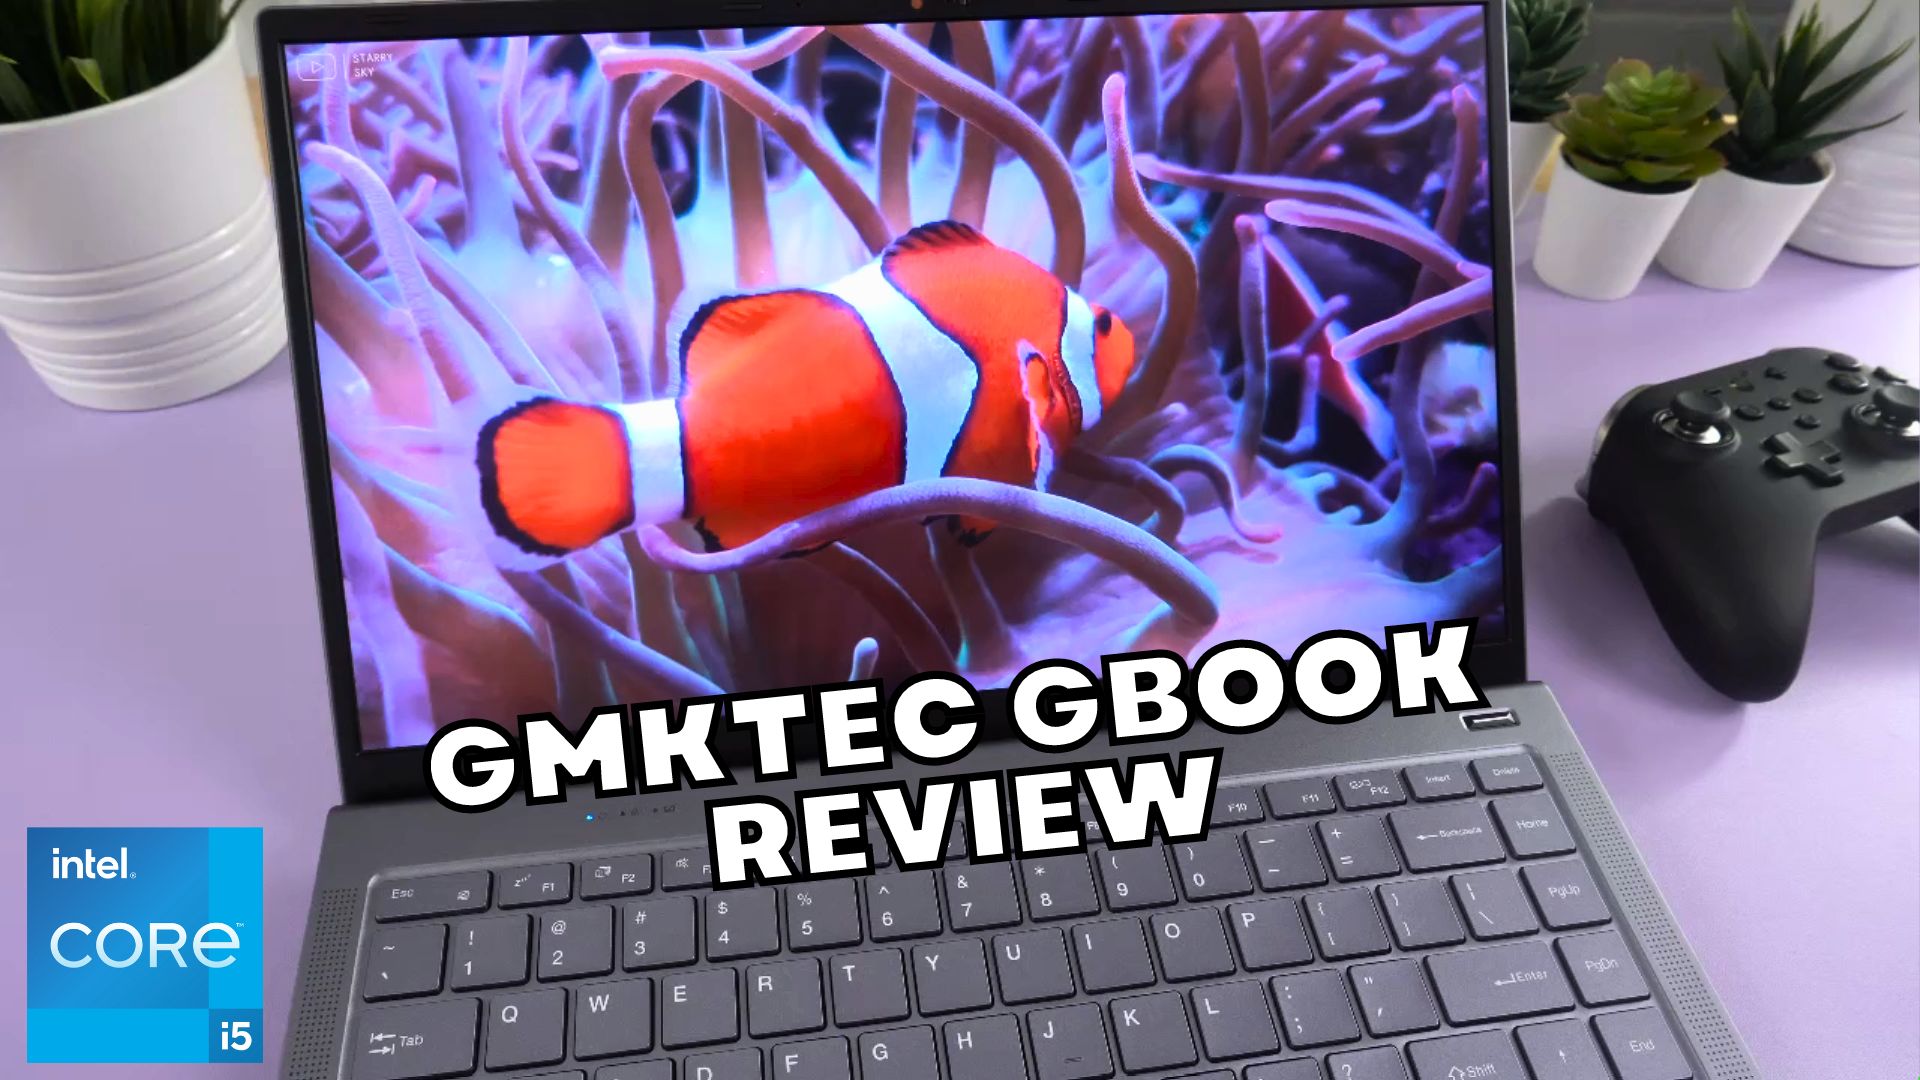 GMKTec Gbook Review – The laptop for home and office work you need in 2023